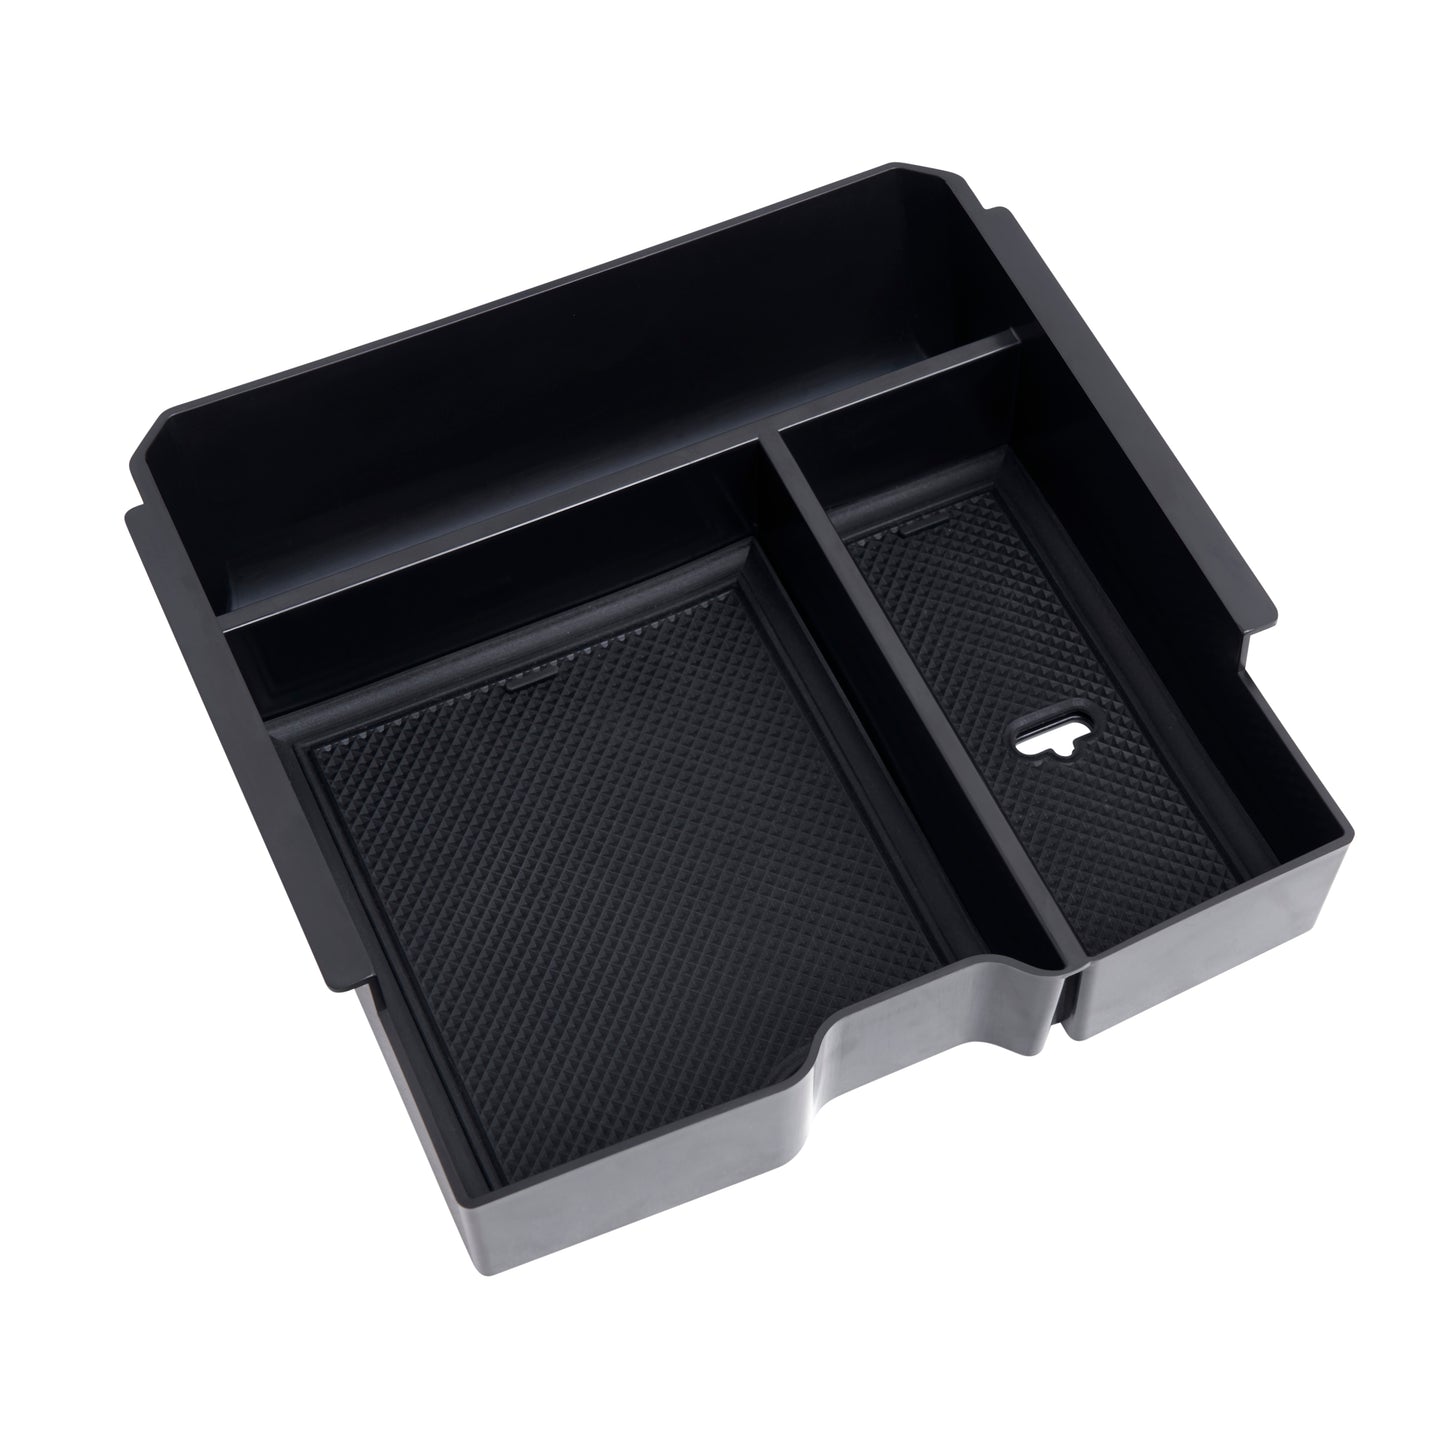 Next Gen Ford Ranger / Everest "Full Size" Centre Console Tray Caddy Storage 2022 2023 2024